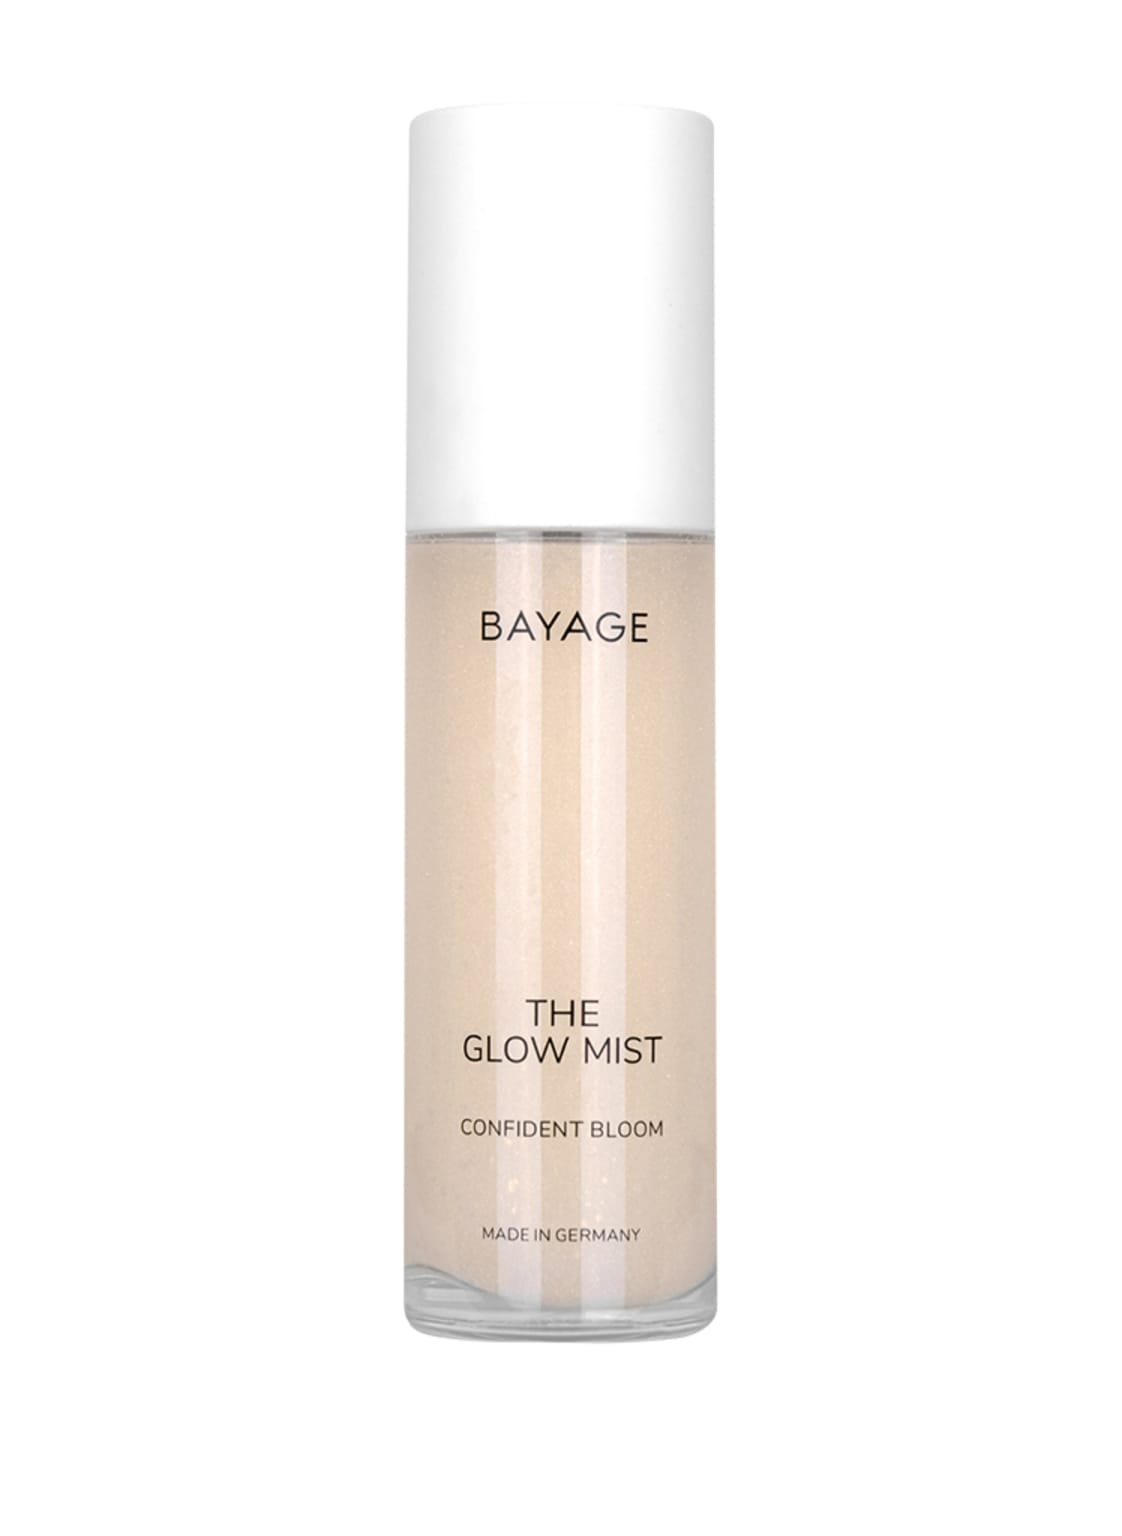 Image of Bayage The Glow Mist Confident Bloom 50 ml